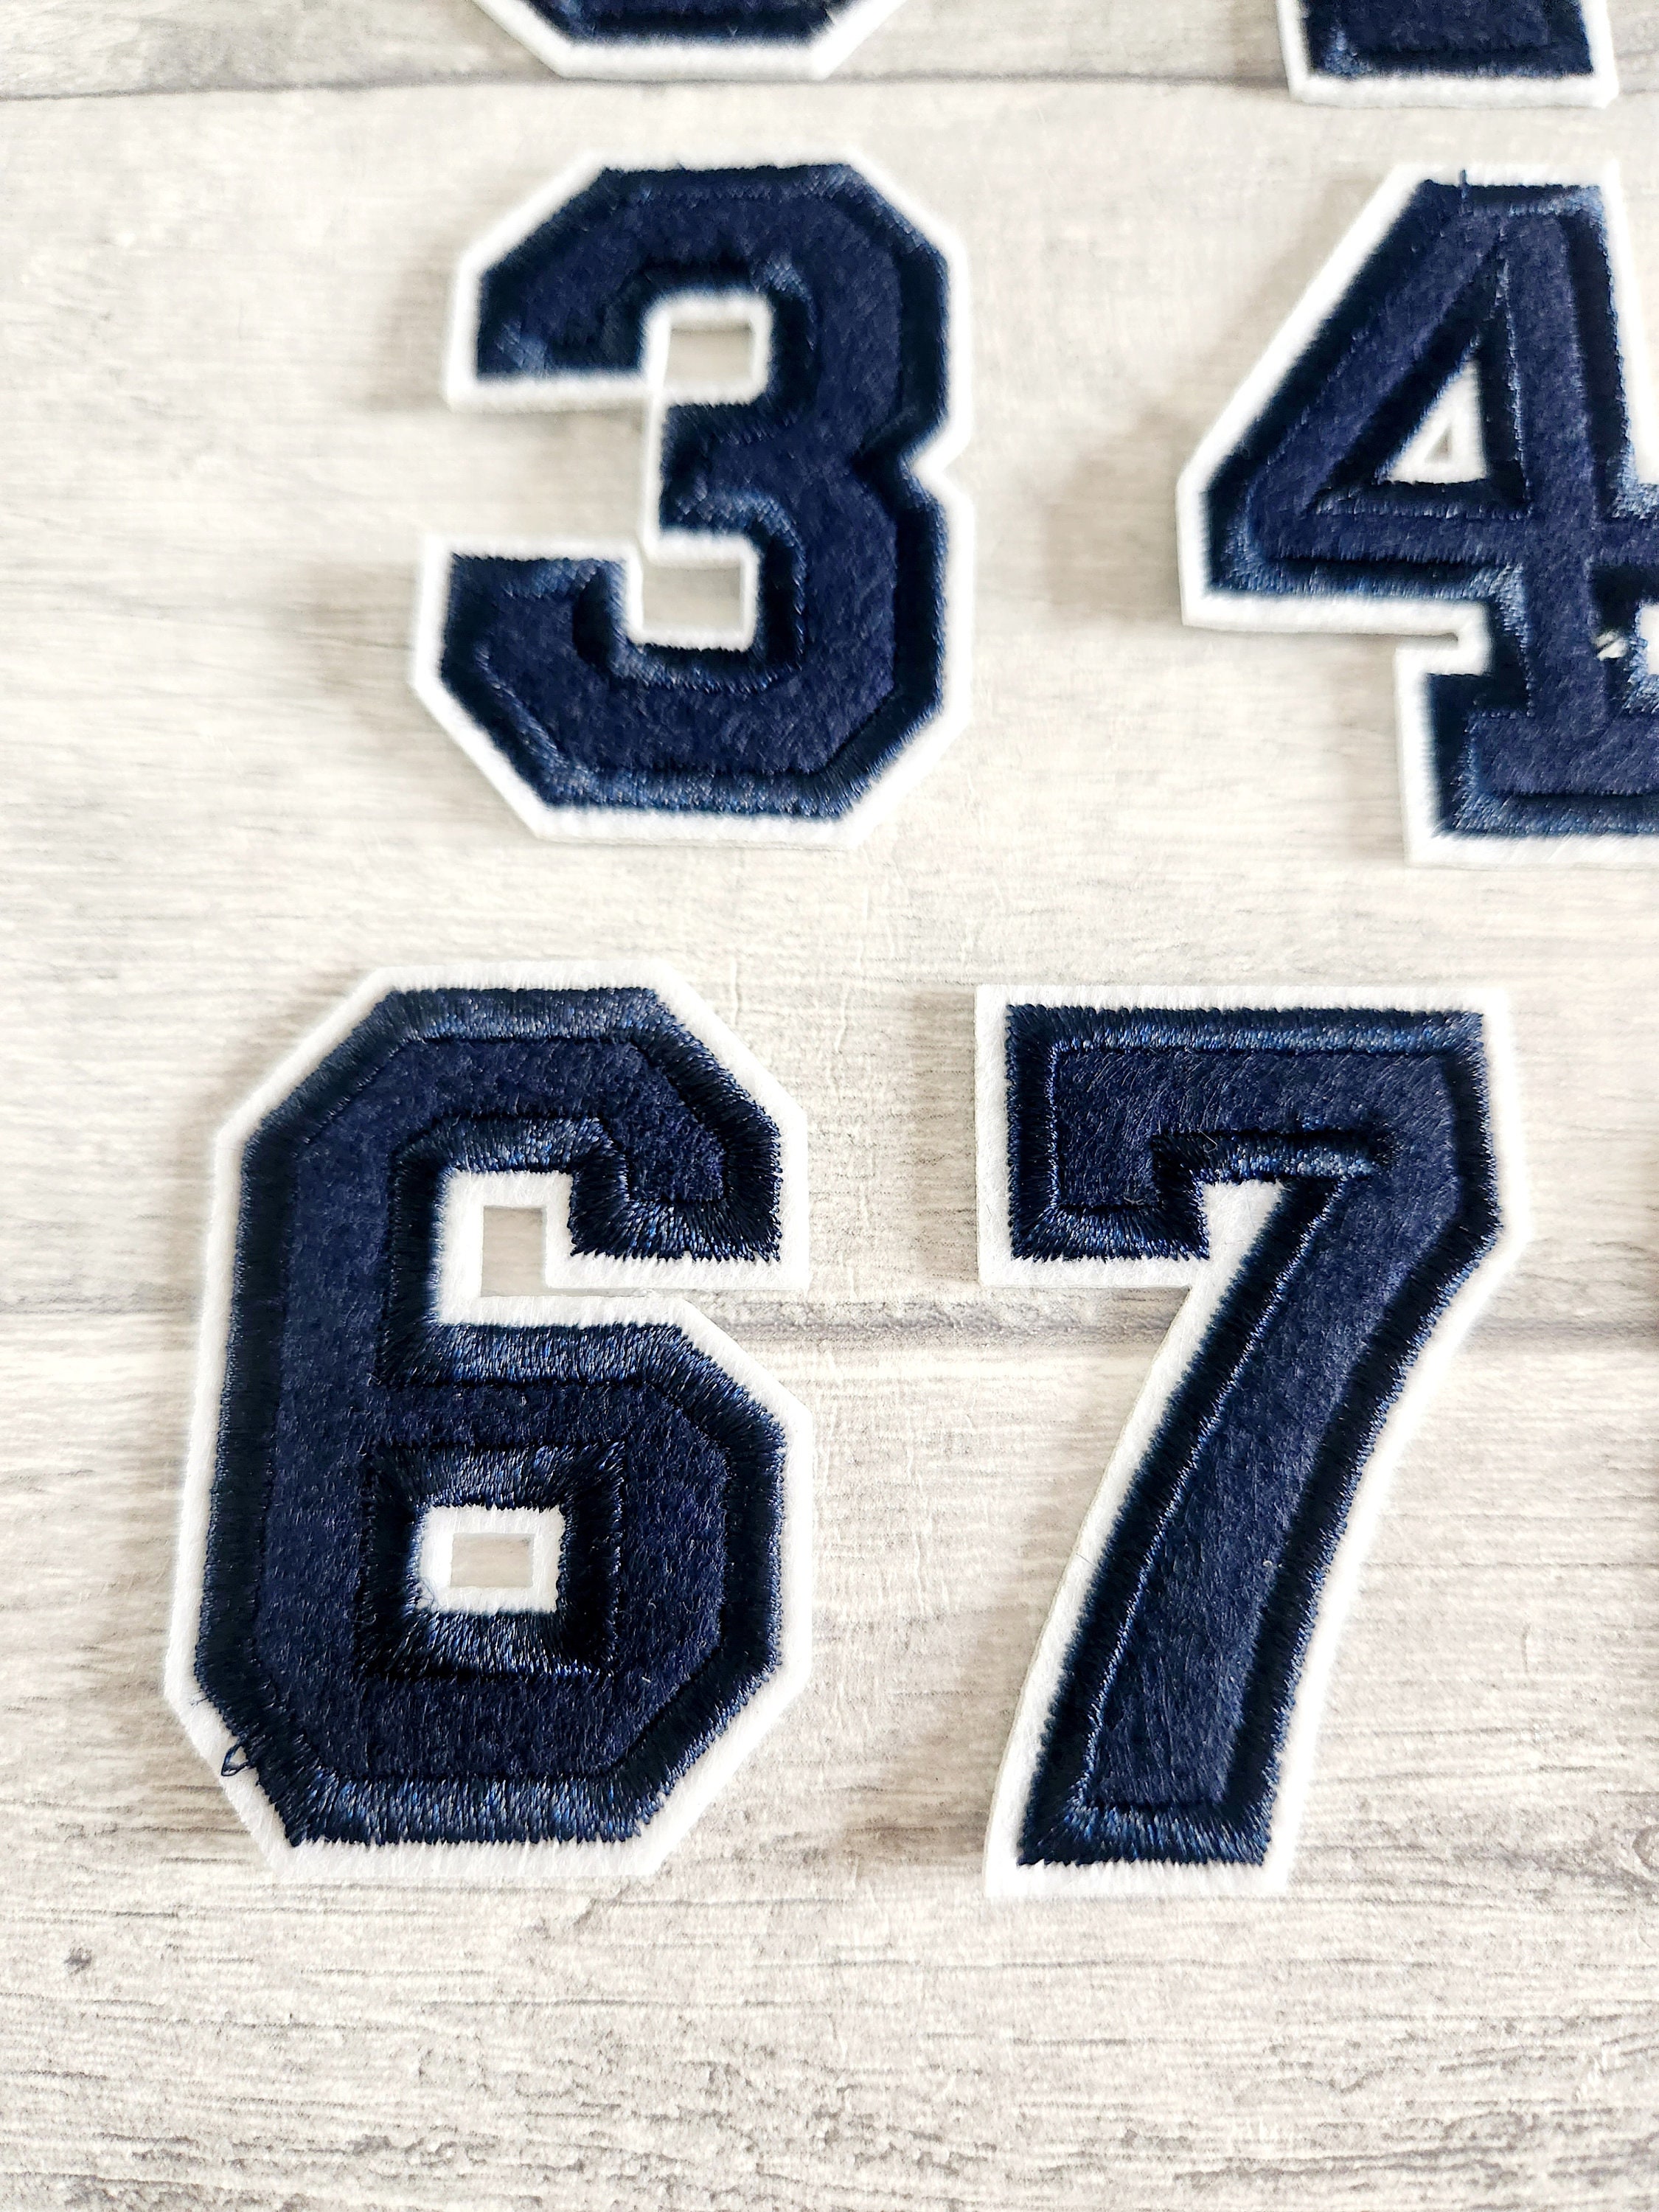 Medium Iron on Letters and Numbers for Clothing Jeysey Hat Letterman  Jackets Clothes Embroidered Varsity Letter Patches Navy Blue AZ Fabric Felt